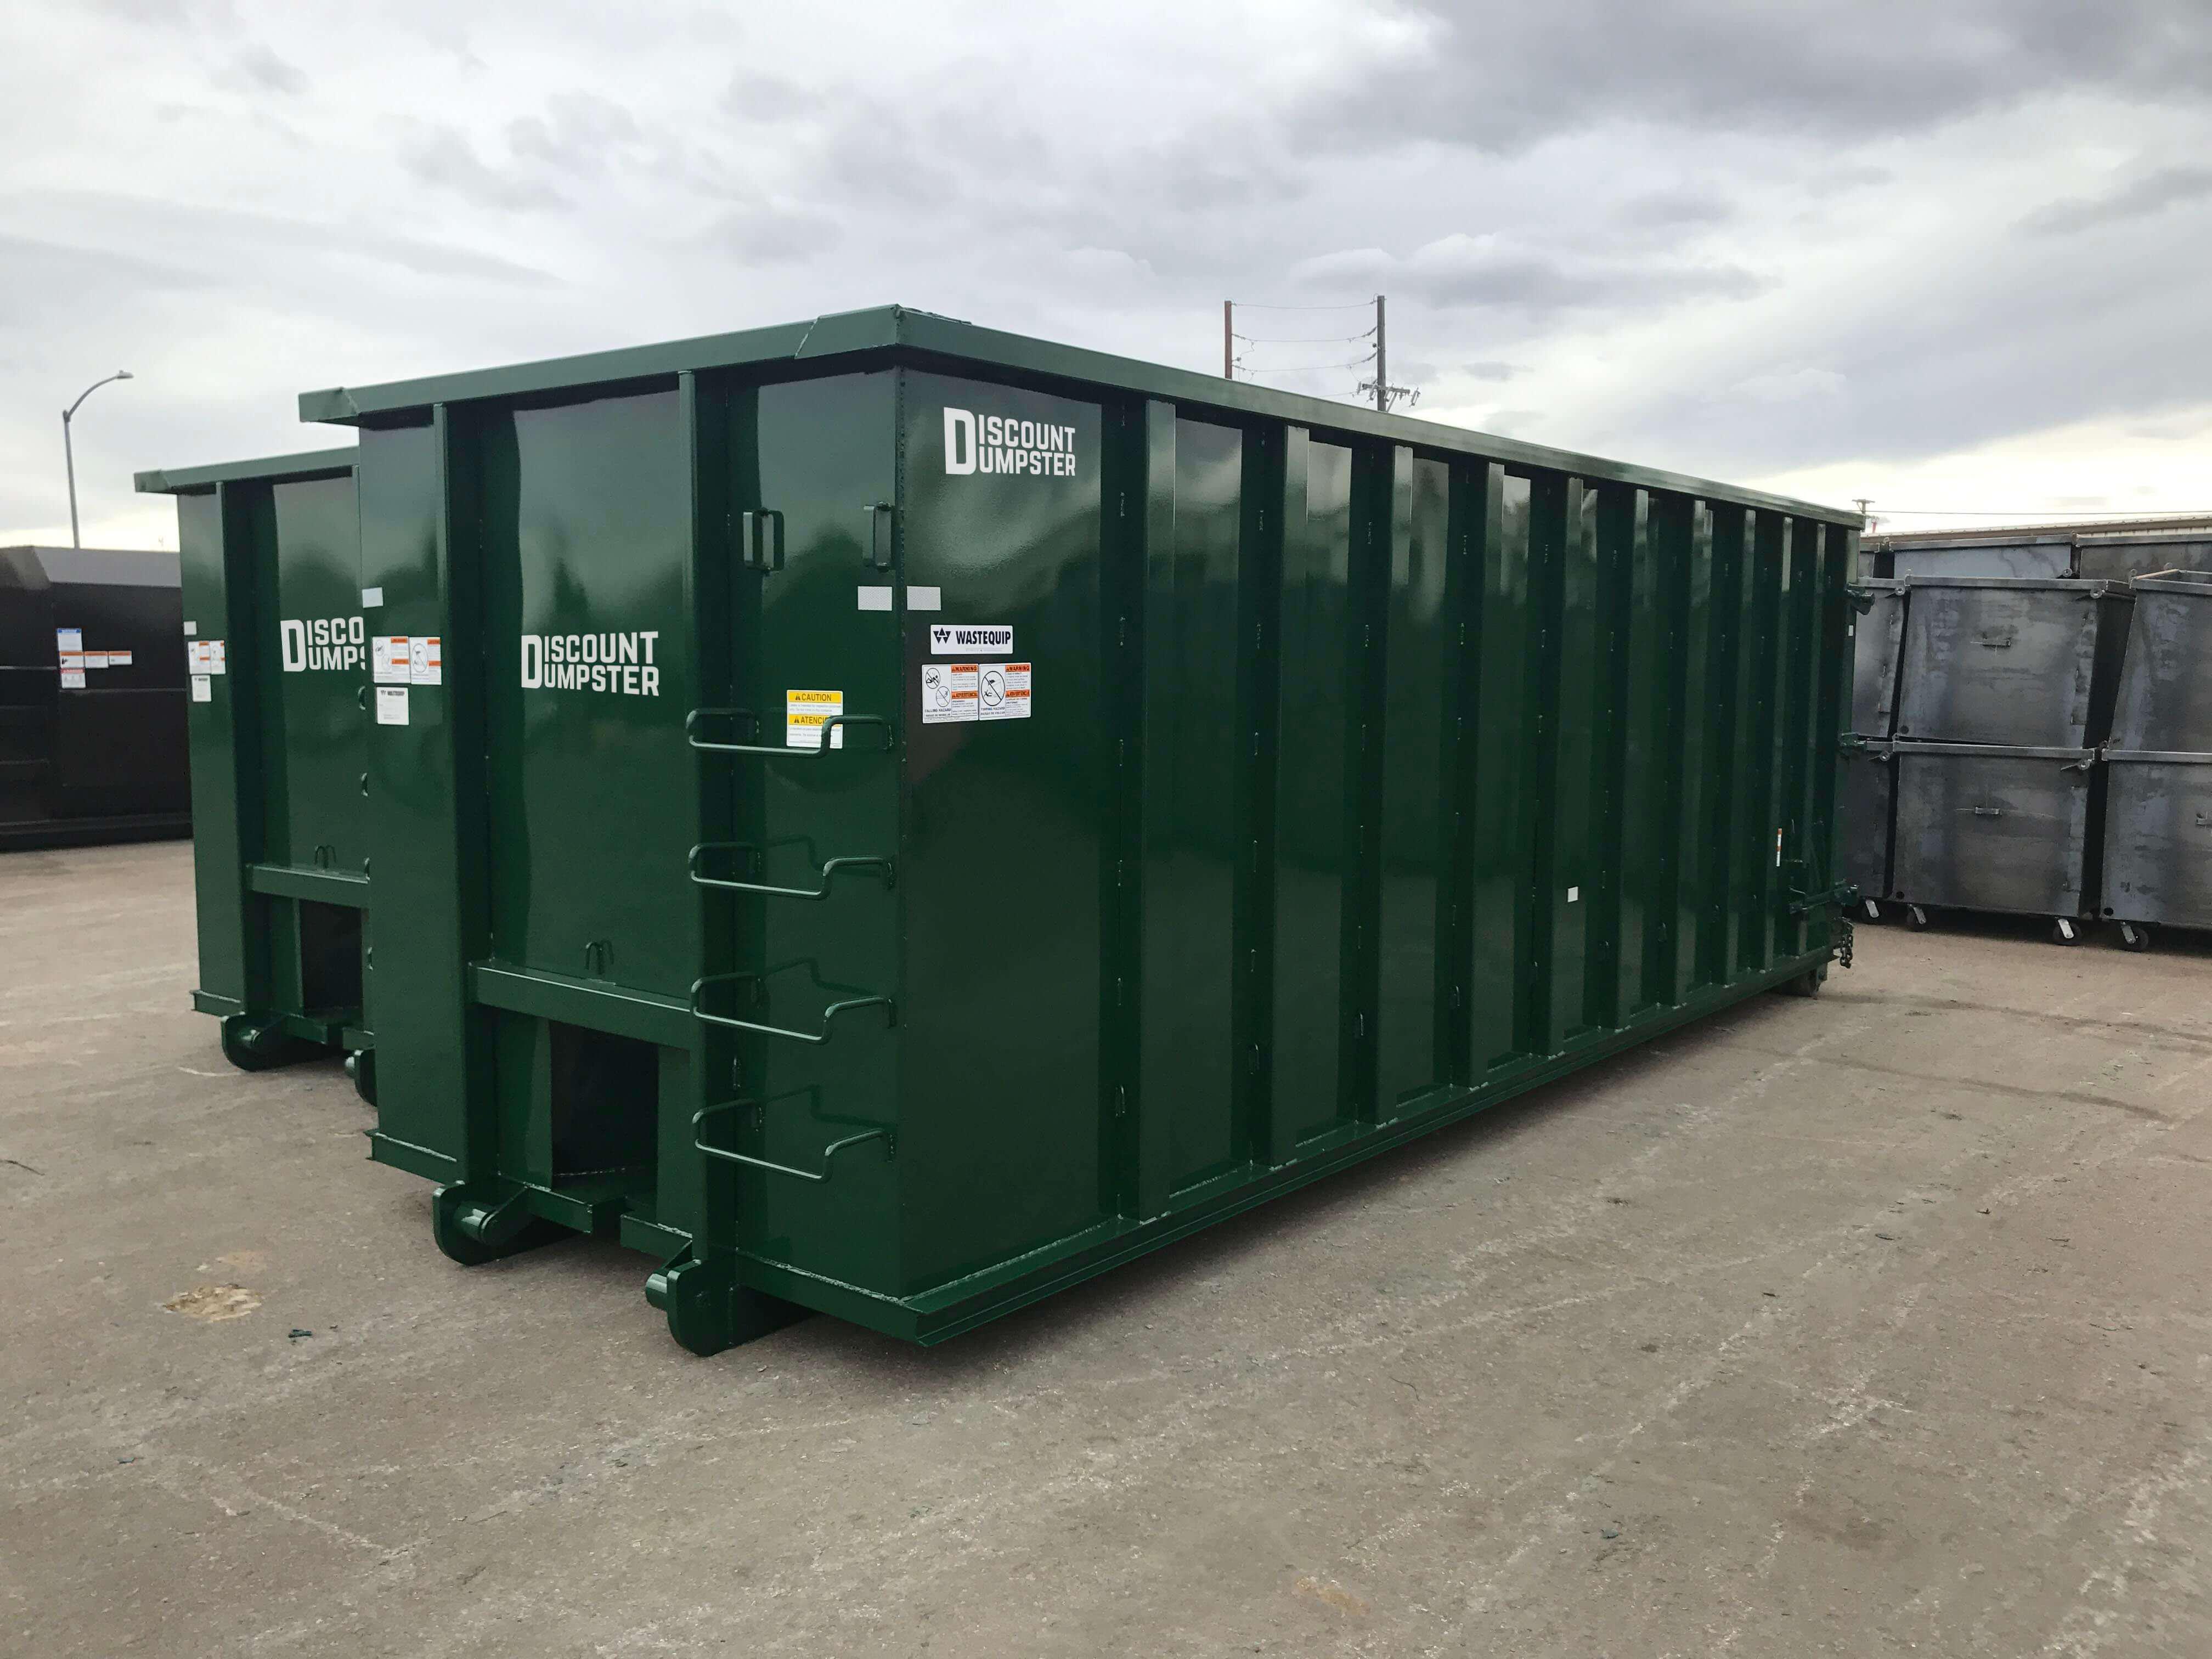 Discount dumpster has dumpsters of all sizes in Denver co